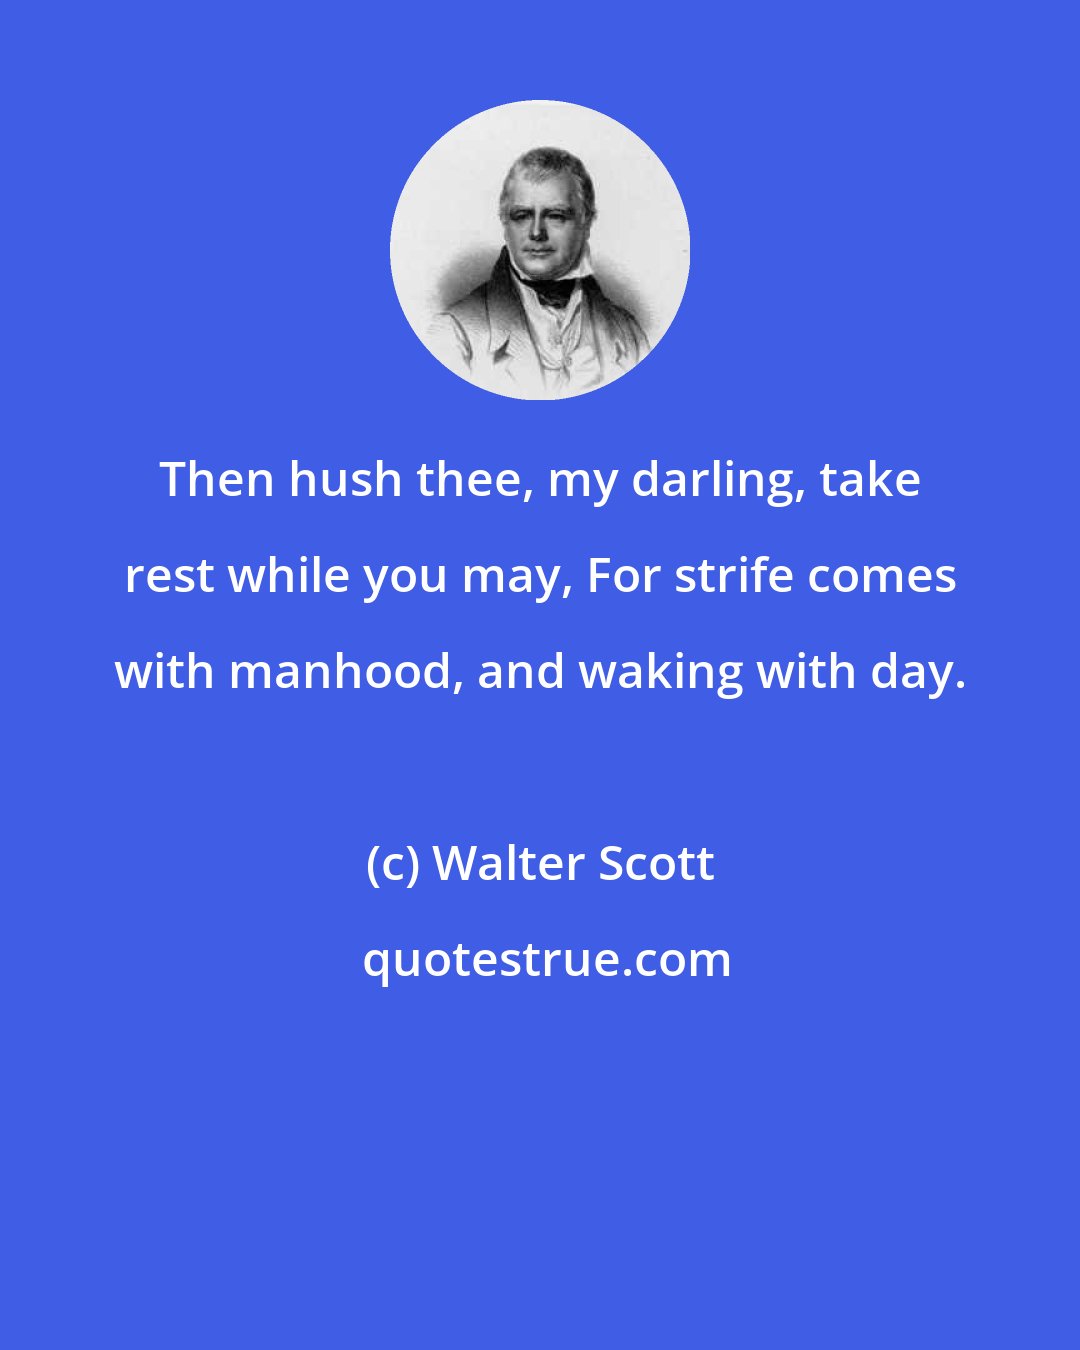 Walter Scott: Then hush thee, my darling, take rest while you may, For strife comes with manhood, and waking with day.